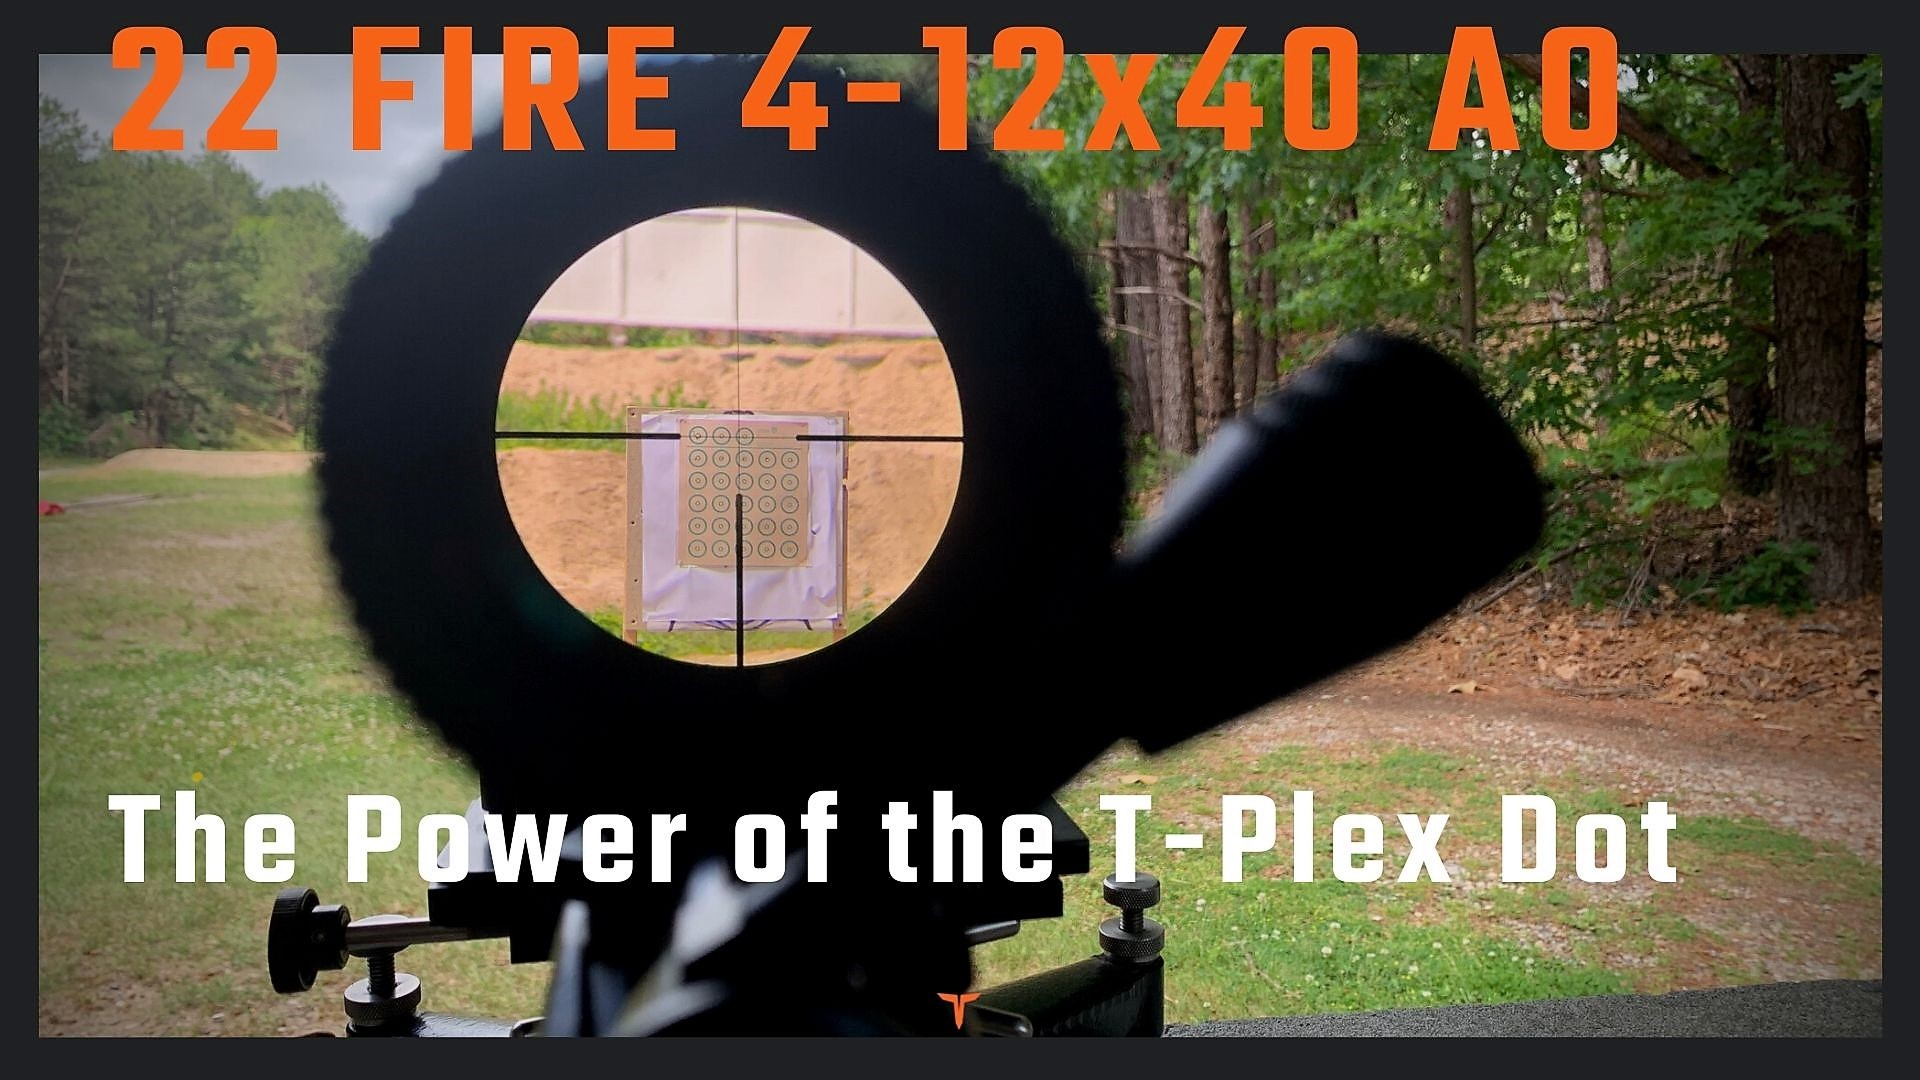 The Power of the T Plex Dot Reticle